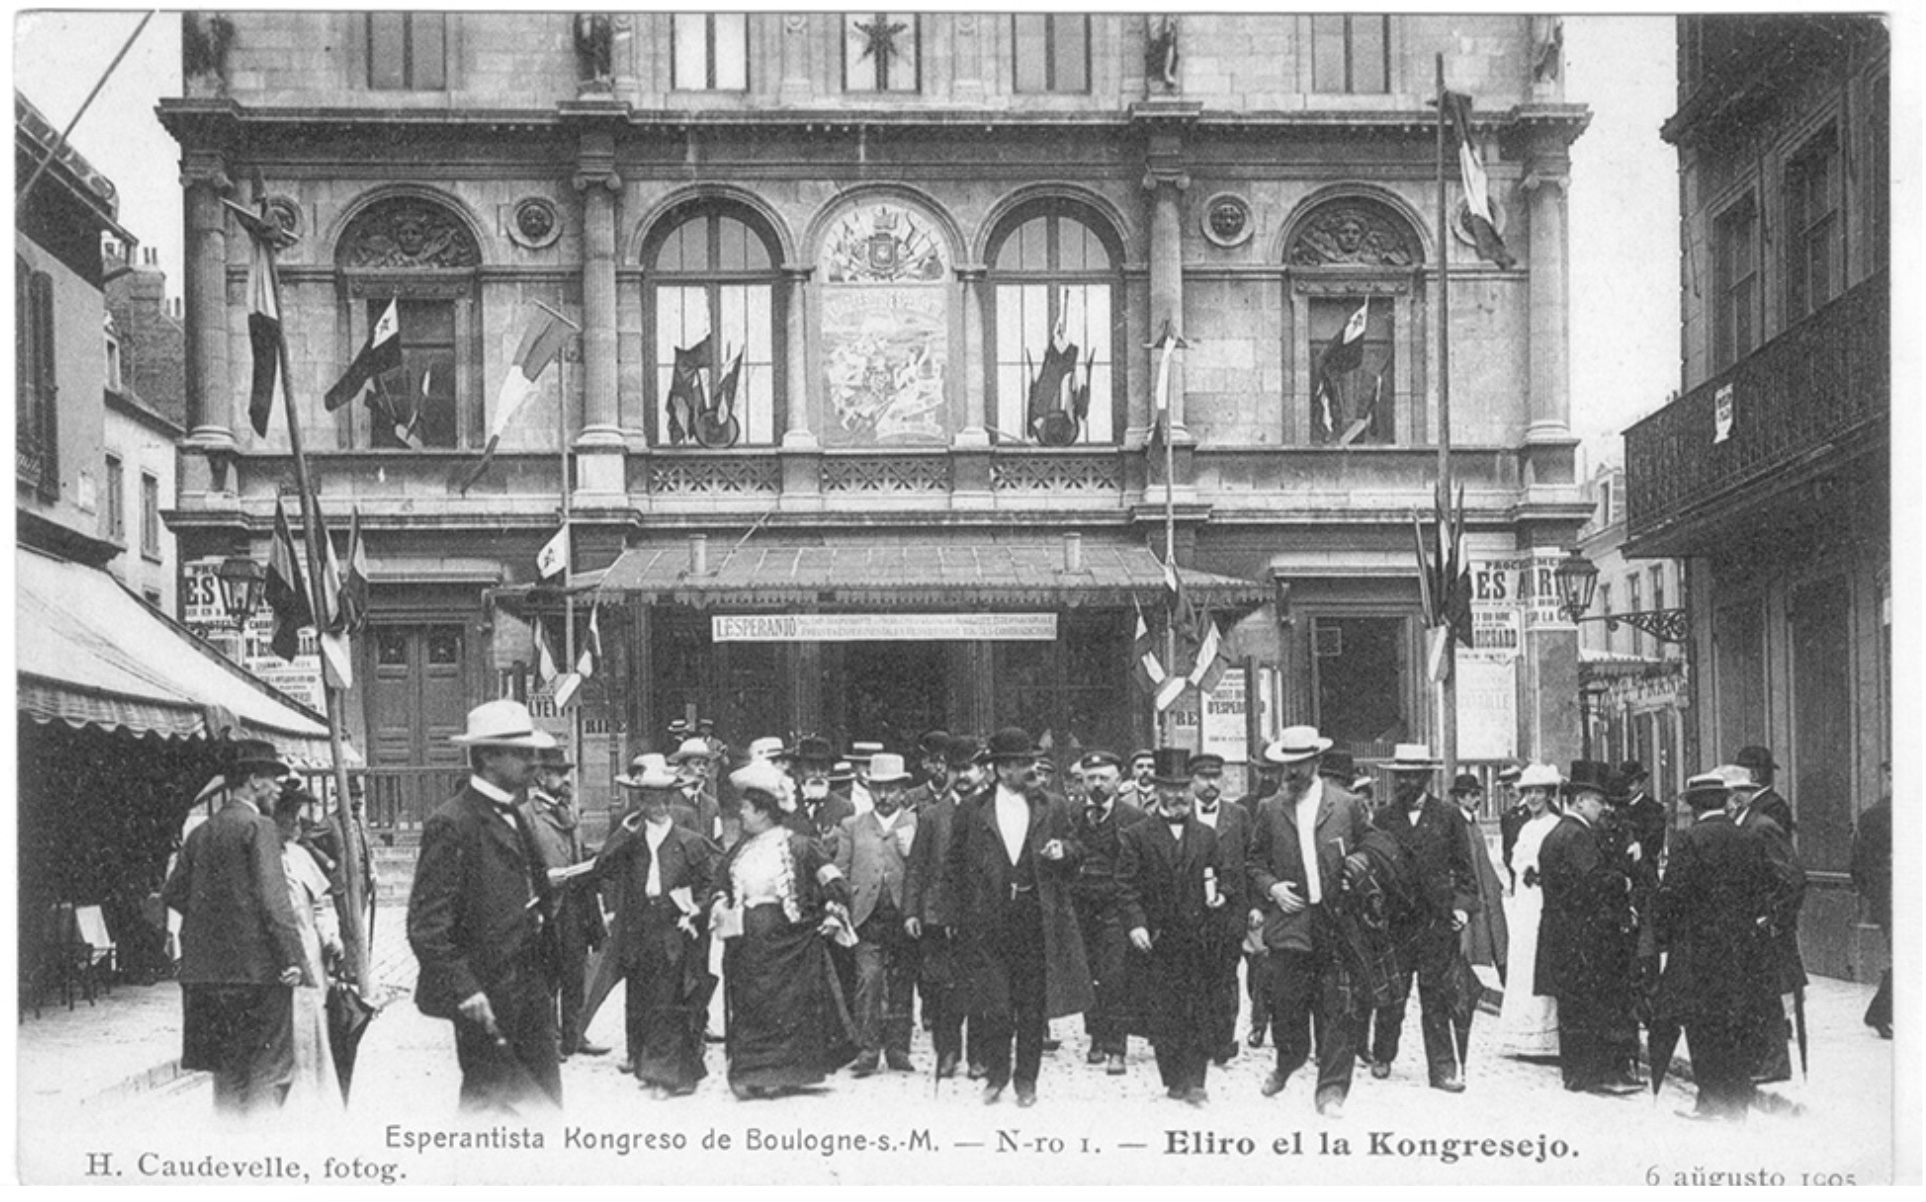 Crowd of people outside a building during the esperanto congress in boulogne-sur-mer.